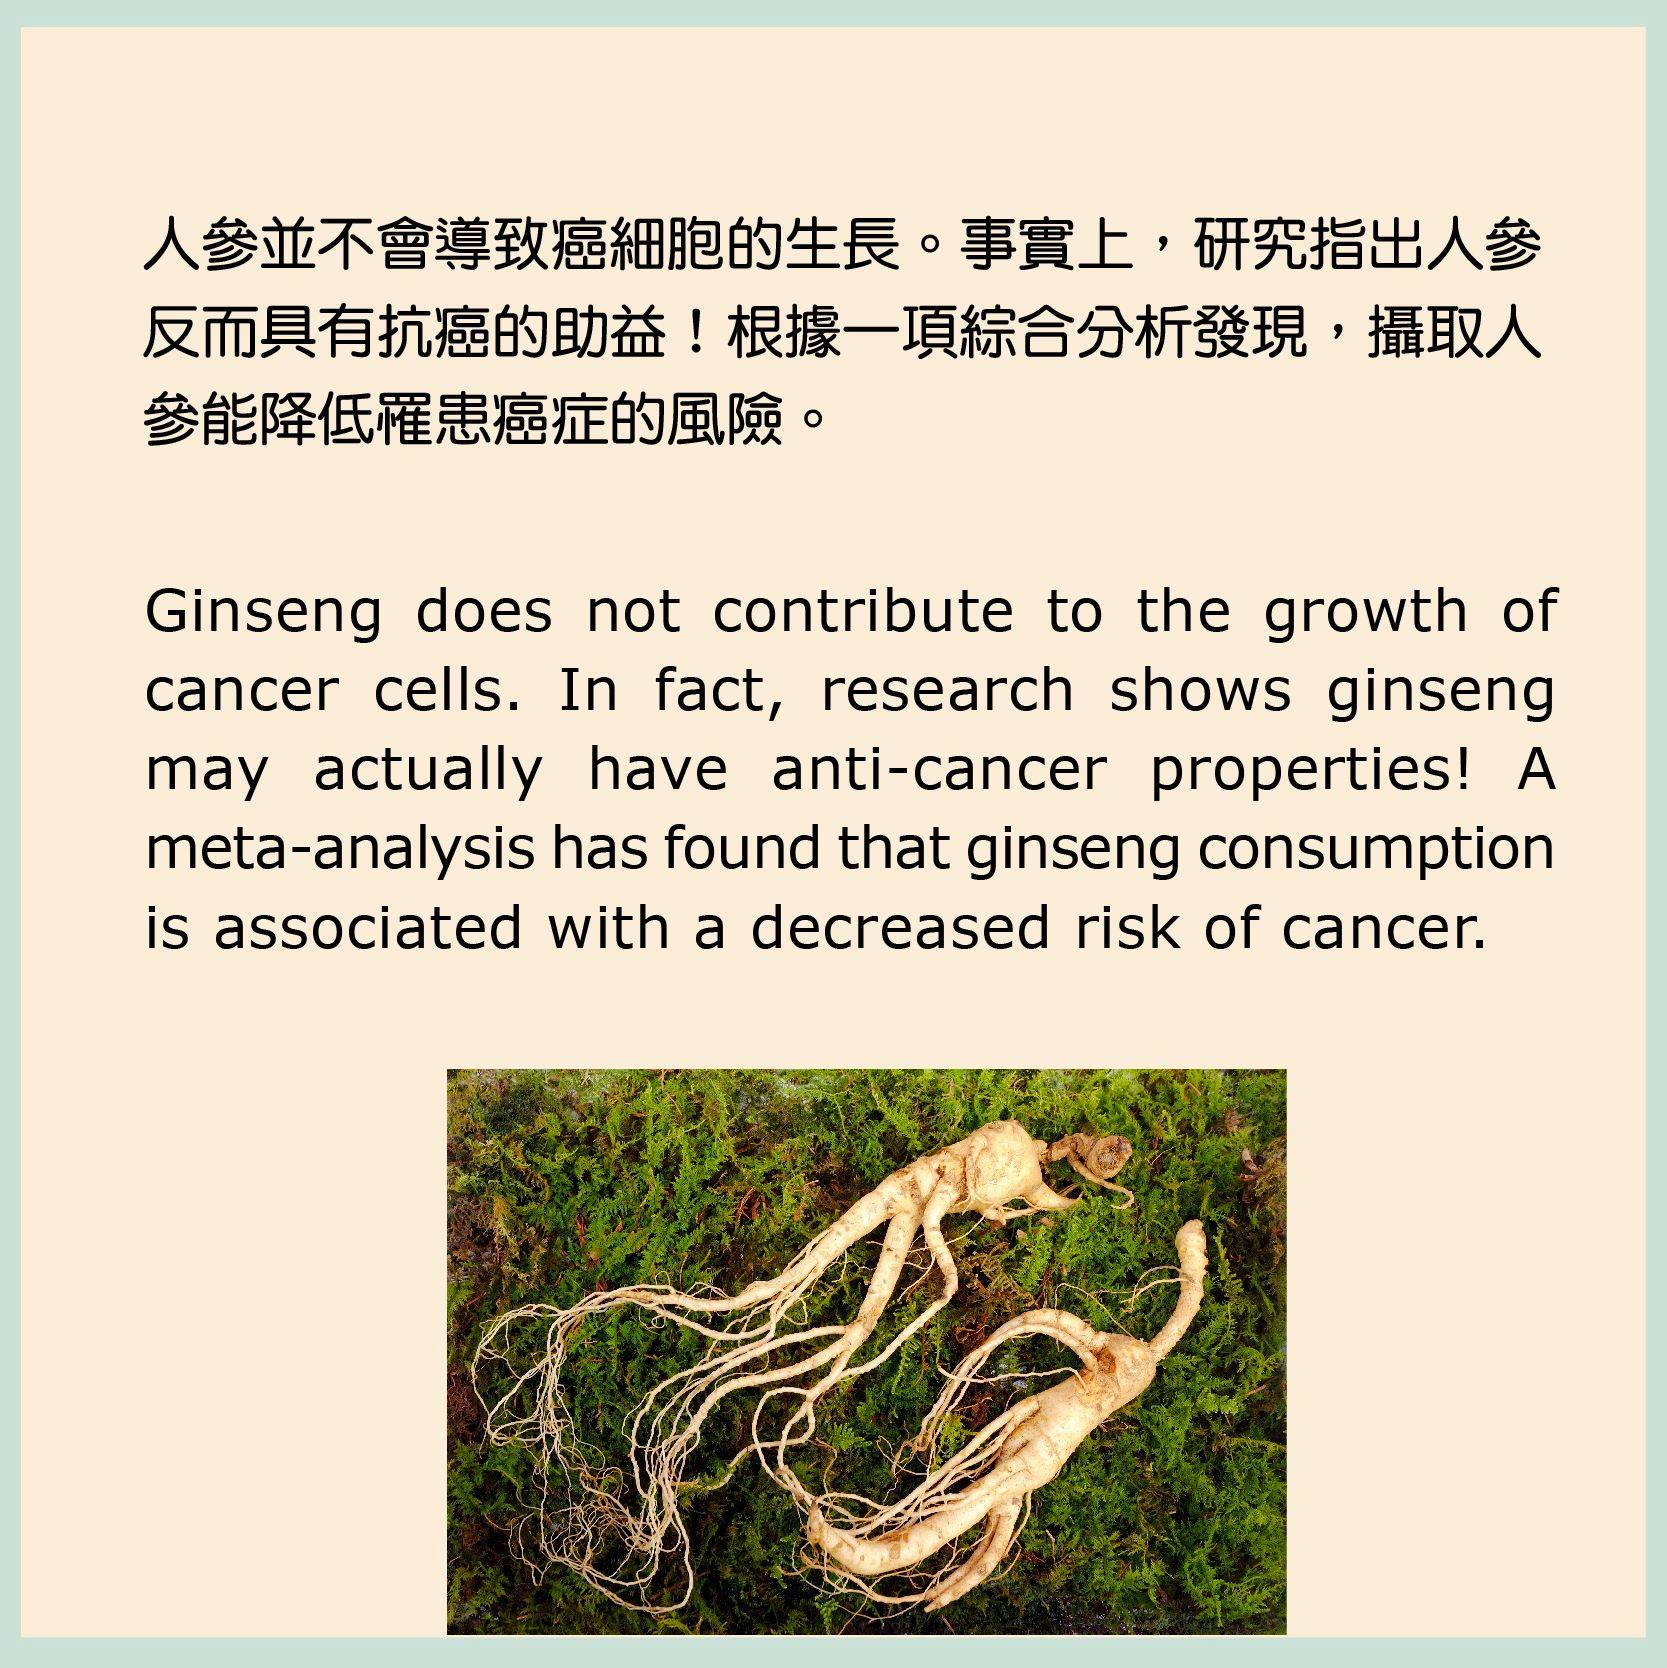 Knowledge - Ginseng